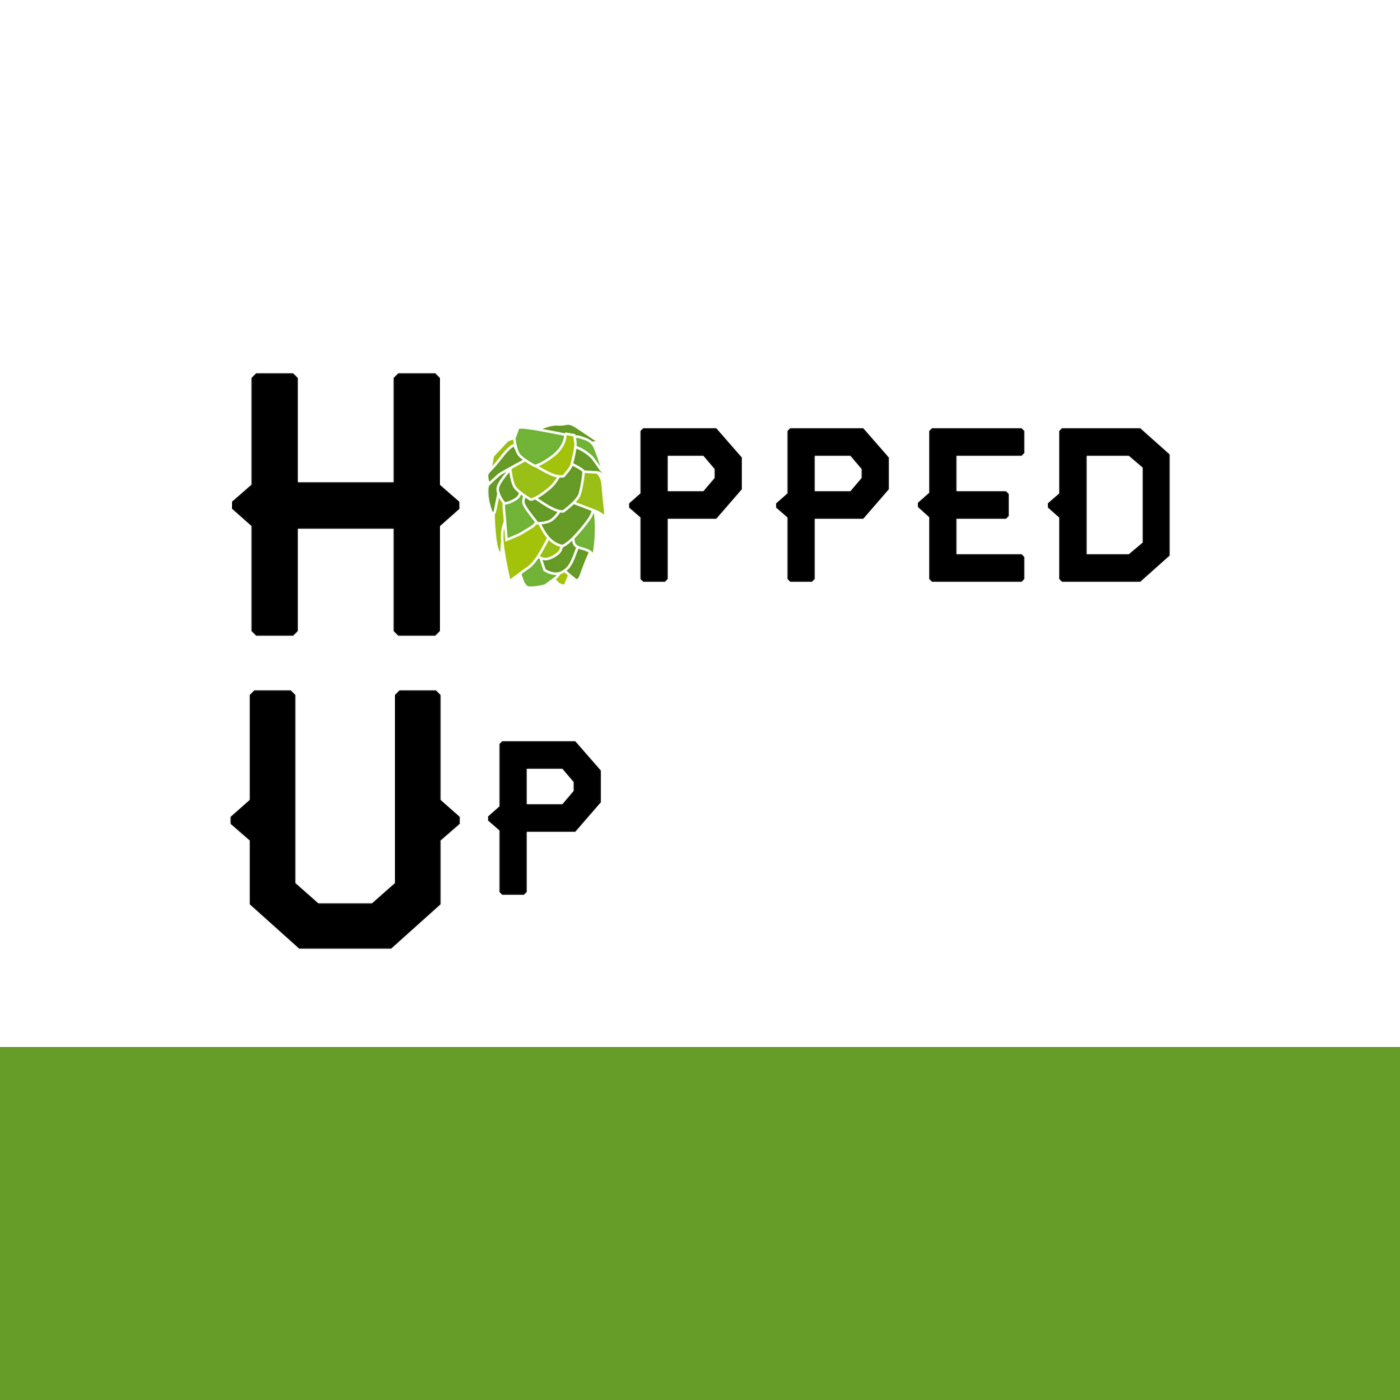 Hopped Up - first edition